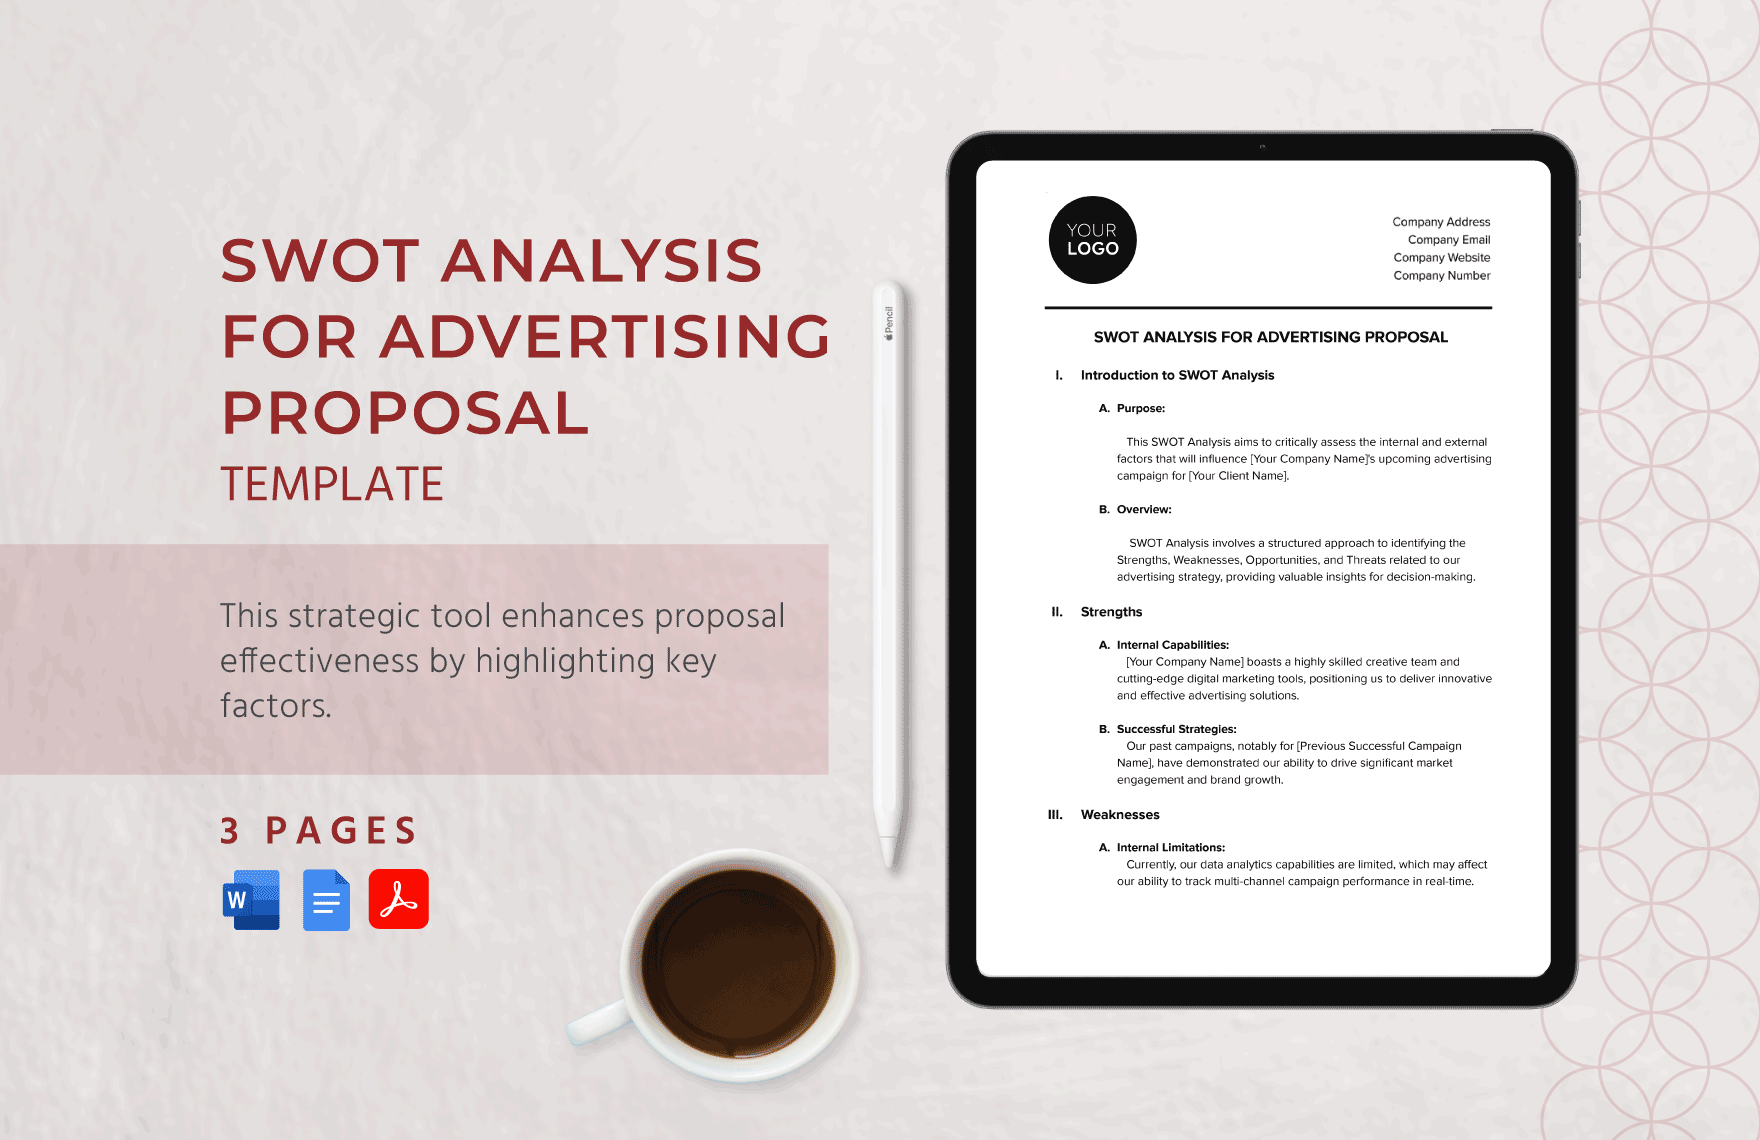 SWOT Analysis for Advertising Proposal Template in Word, Google Docs, PDF